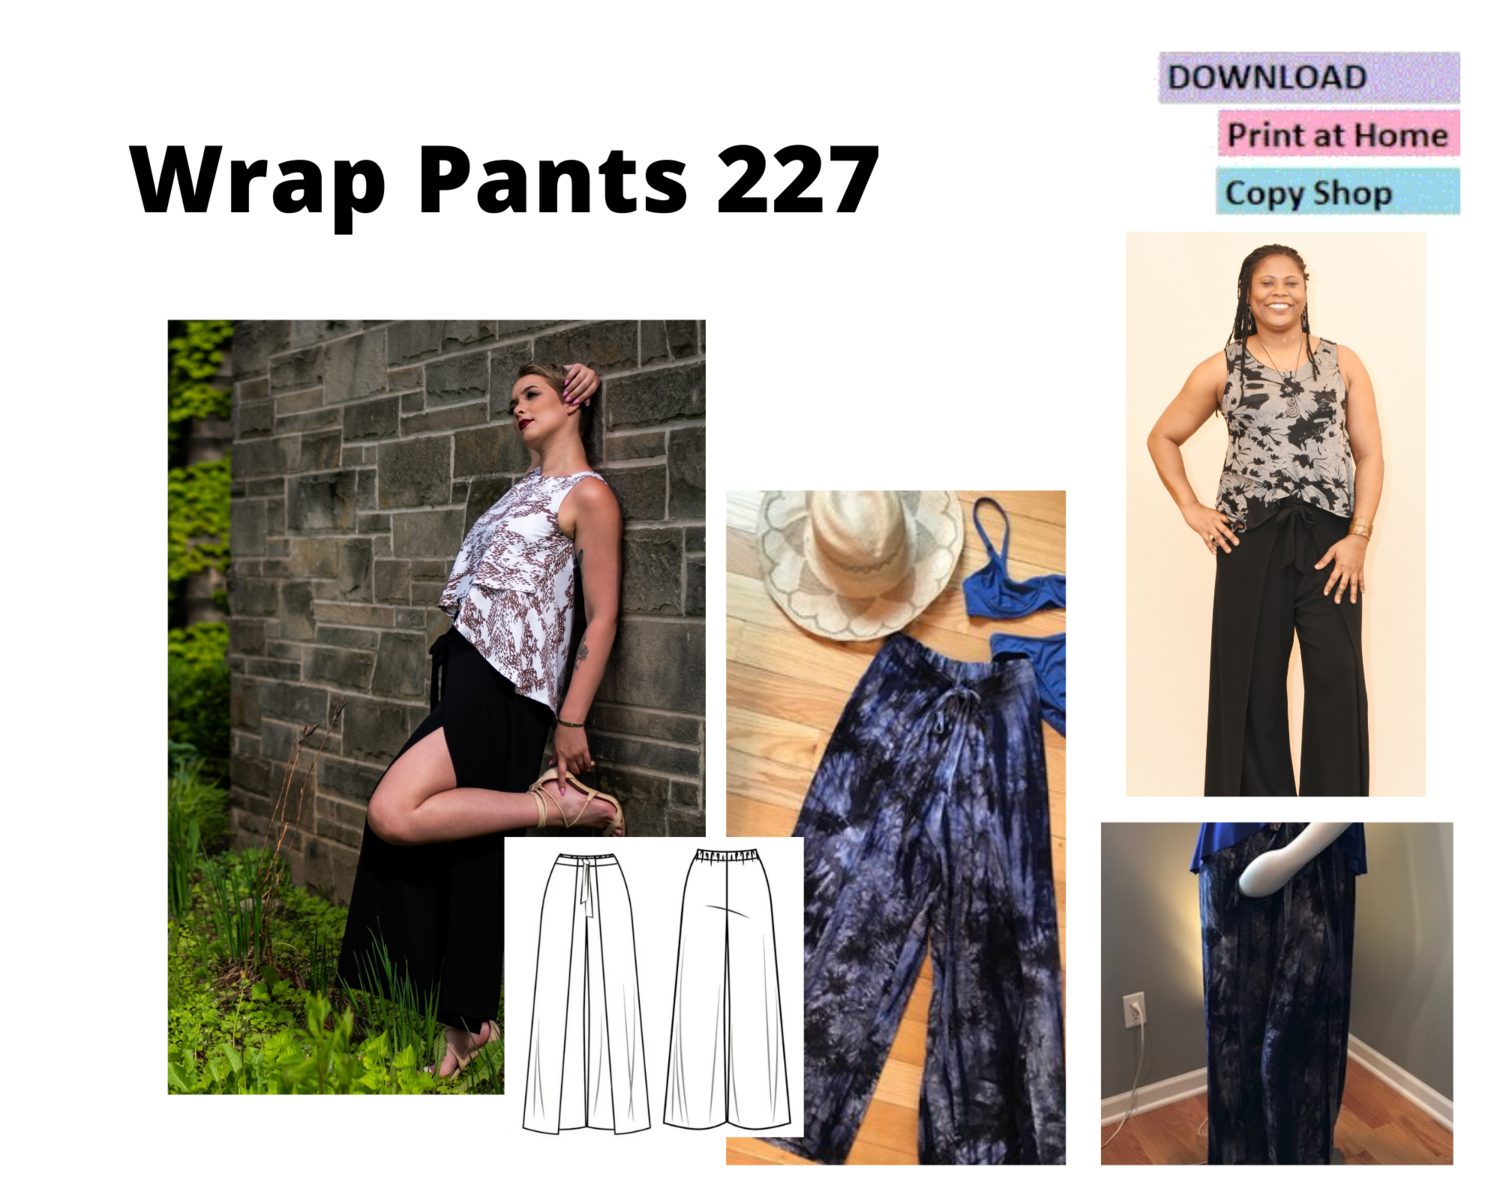 How To Make Wrap Pant  Easy To Make Wrap Pant For Your Own Size